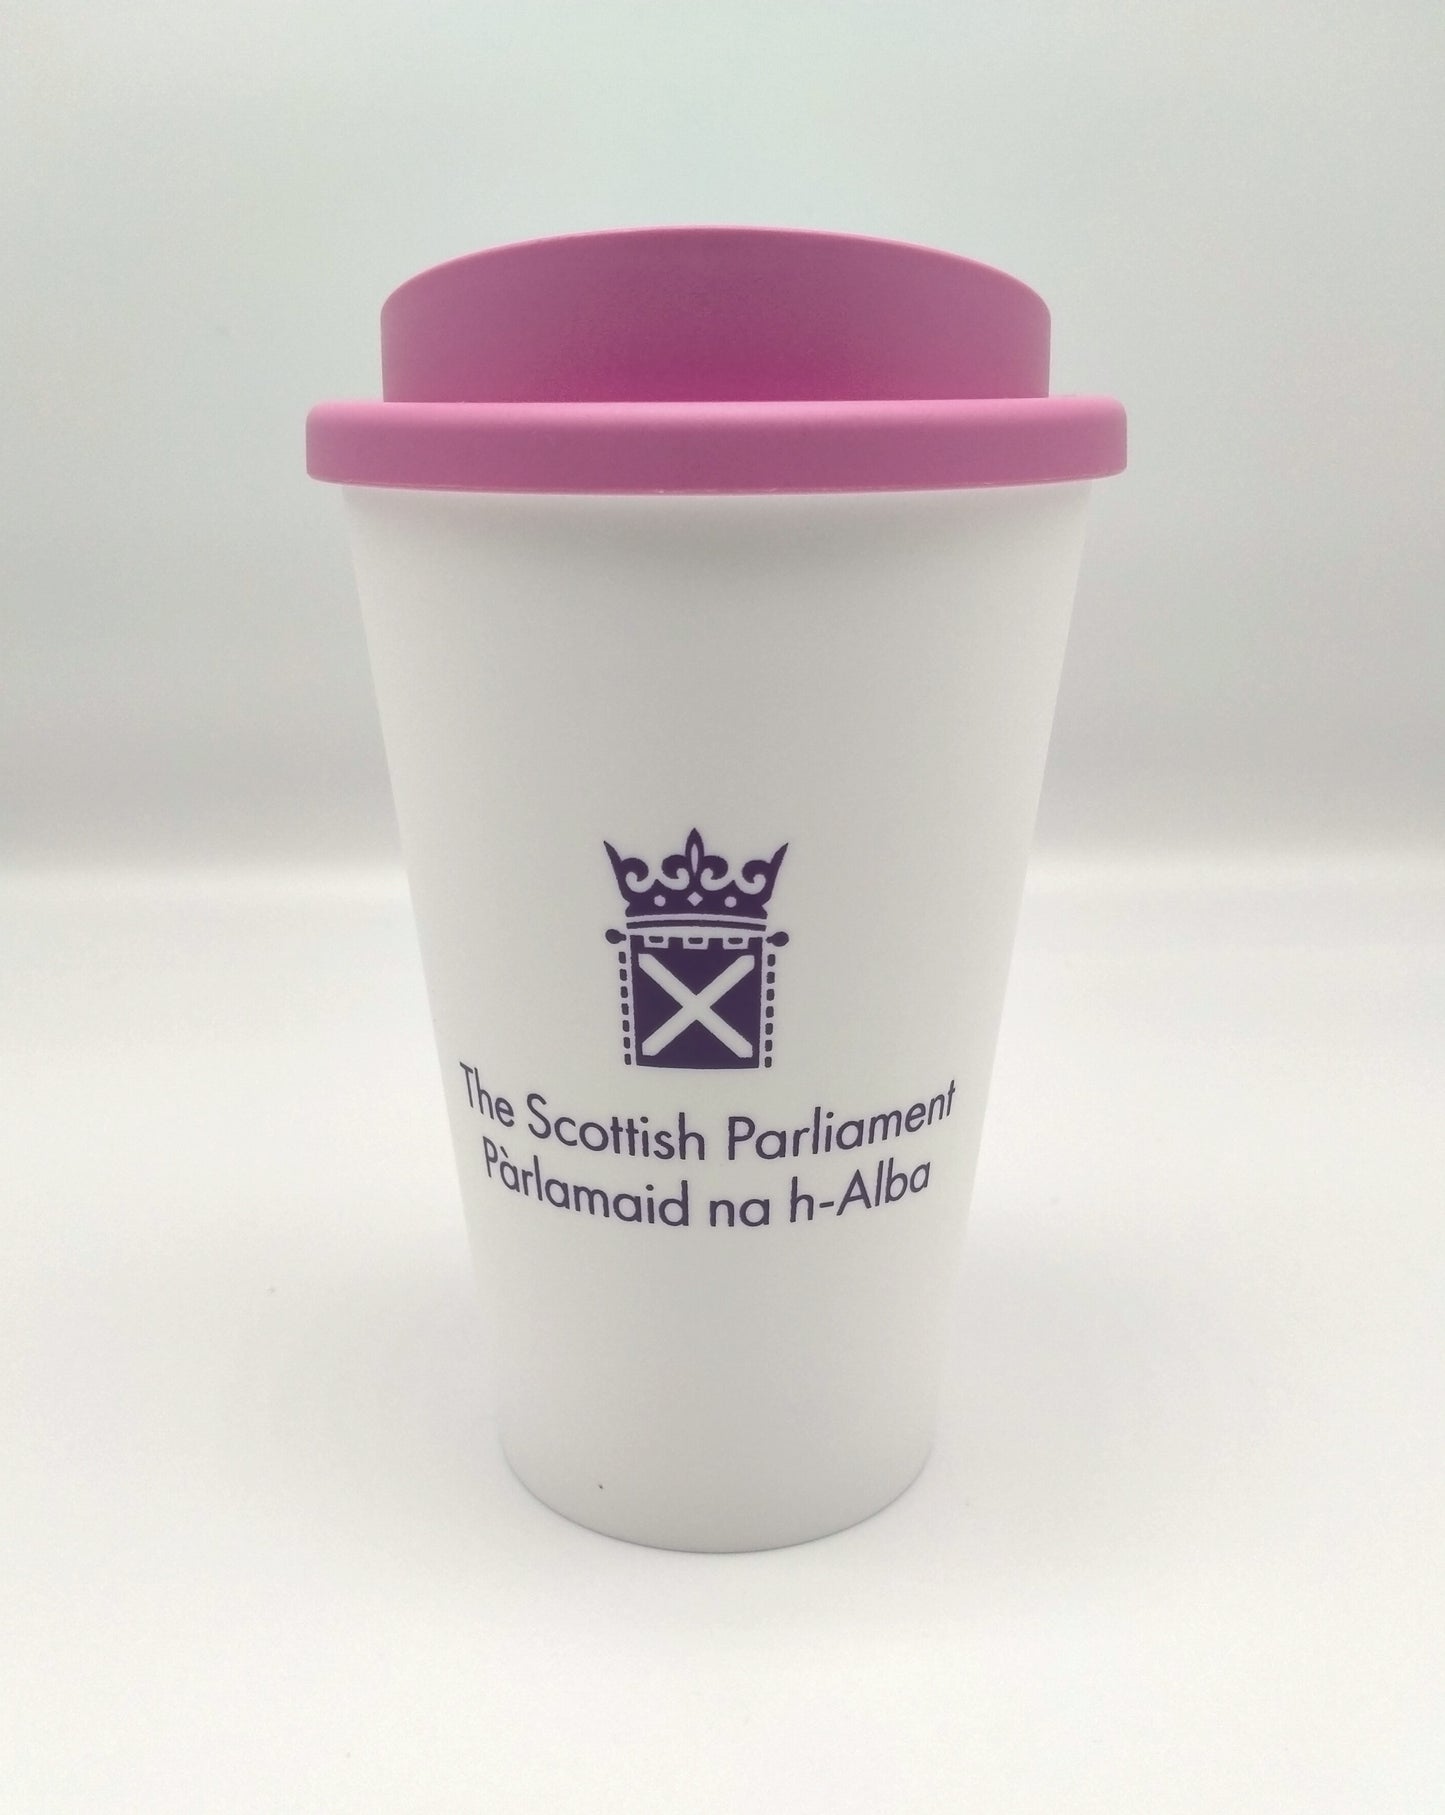 A white cup with a pink lid, decorated with the symbol of the Scottish Parliament in purple.